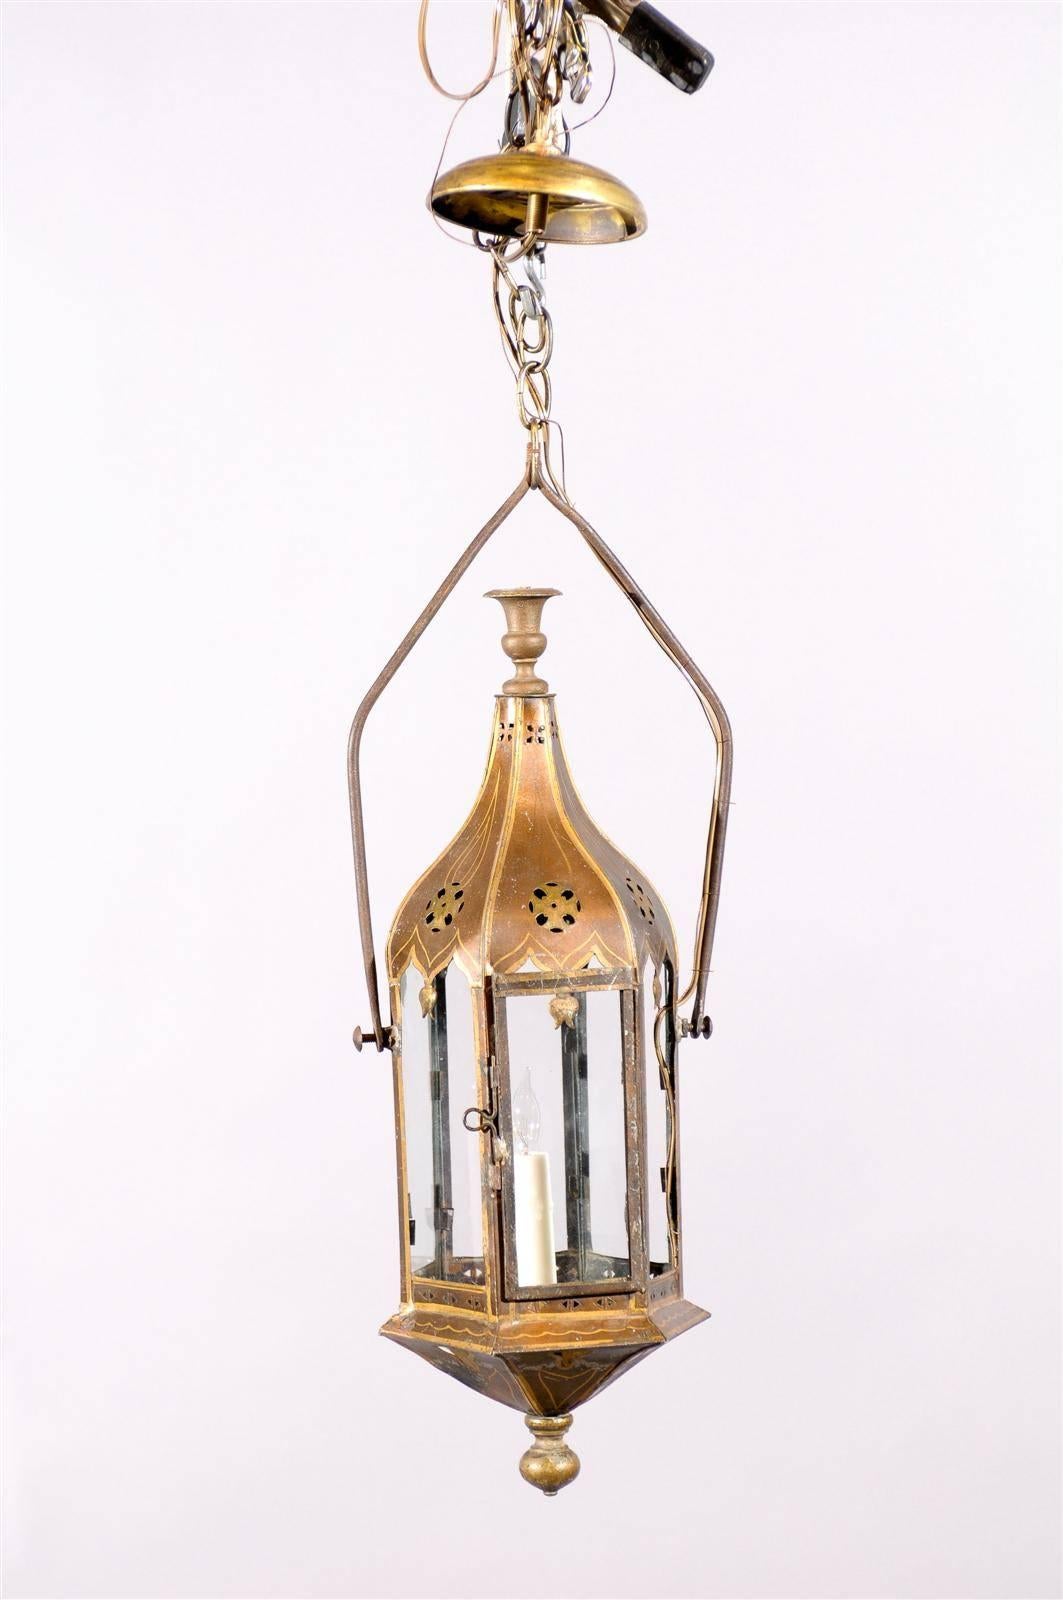 19th century French hexagonal shaped single (1-light) lantern in brown and gold painted tole.